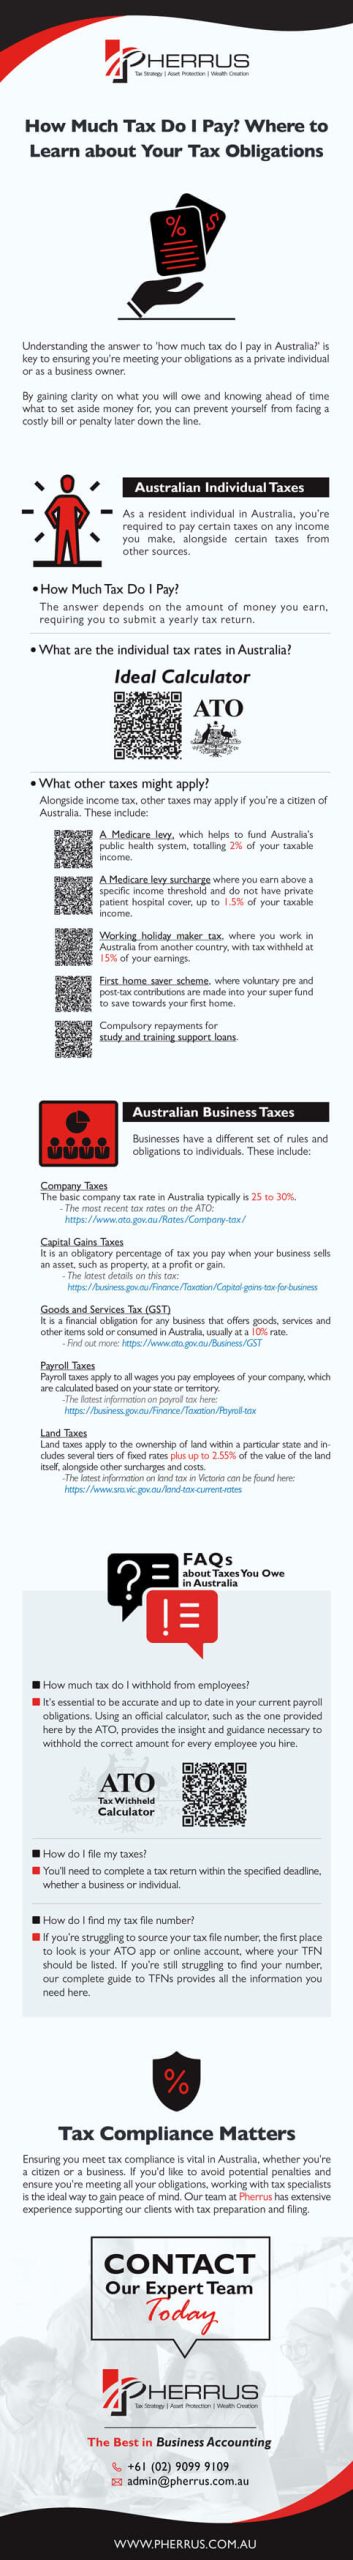 How Much Tax Do I Pay? Find the Resources You Need infographic